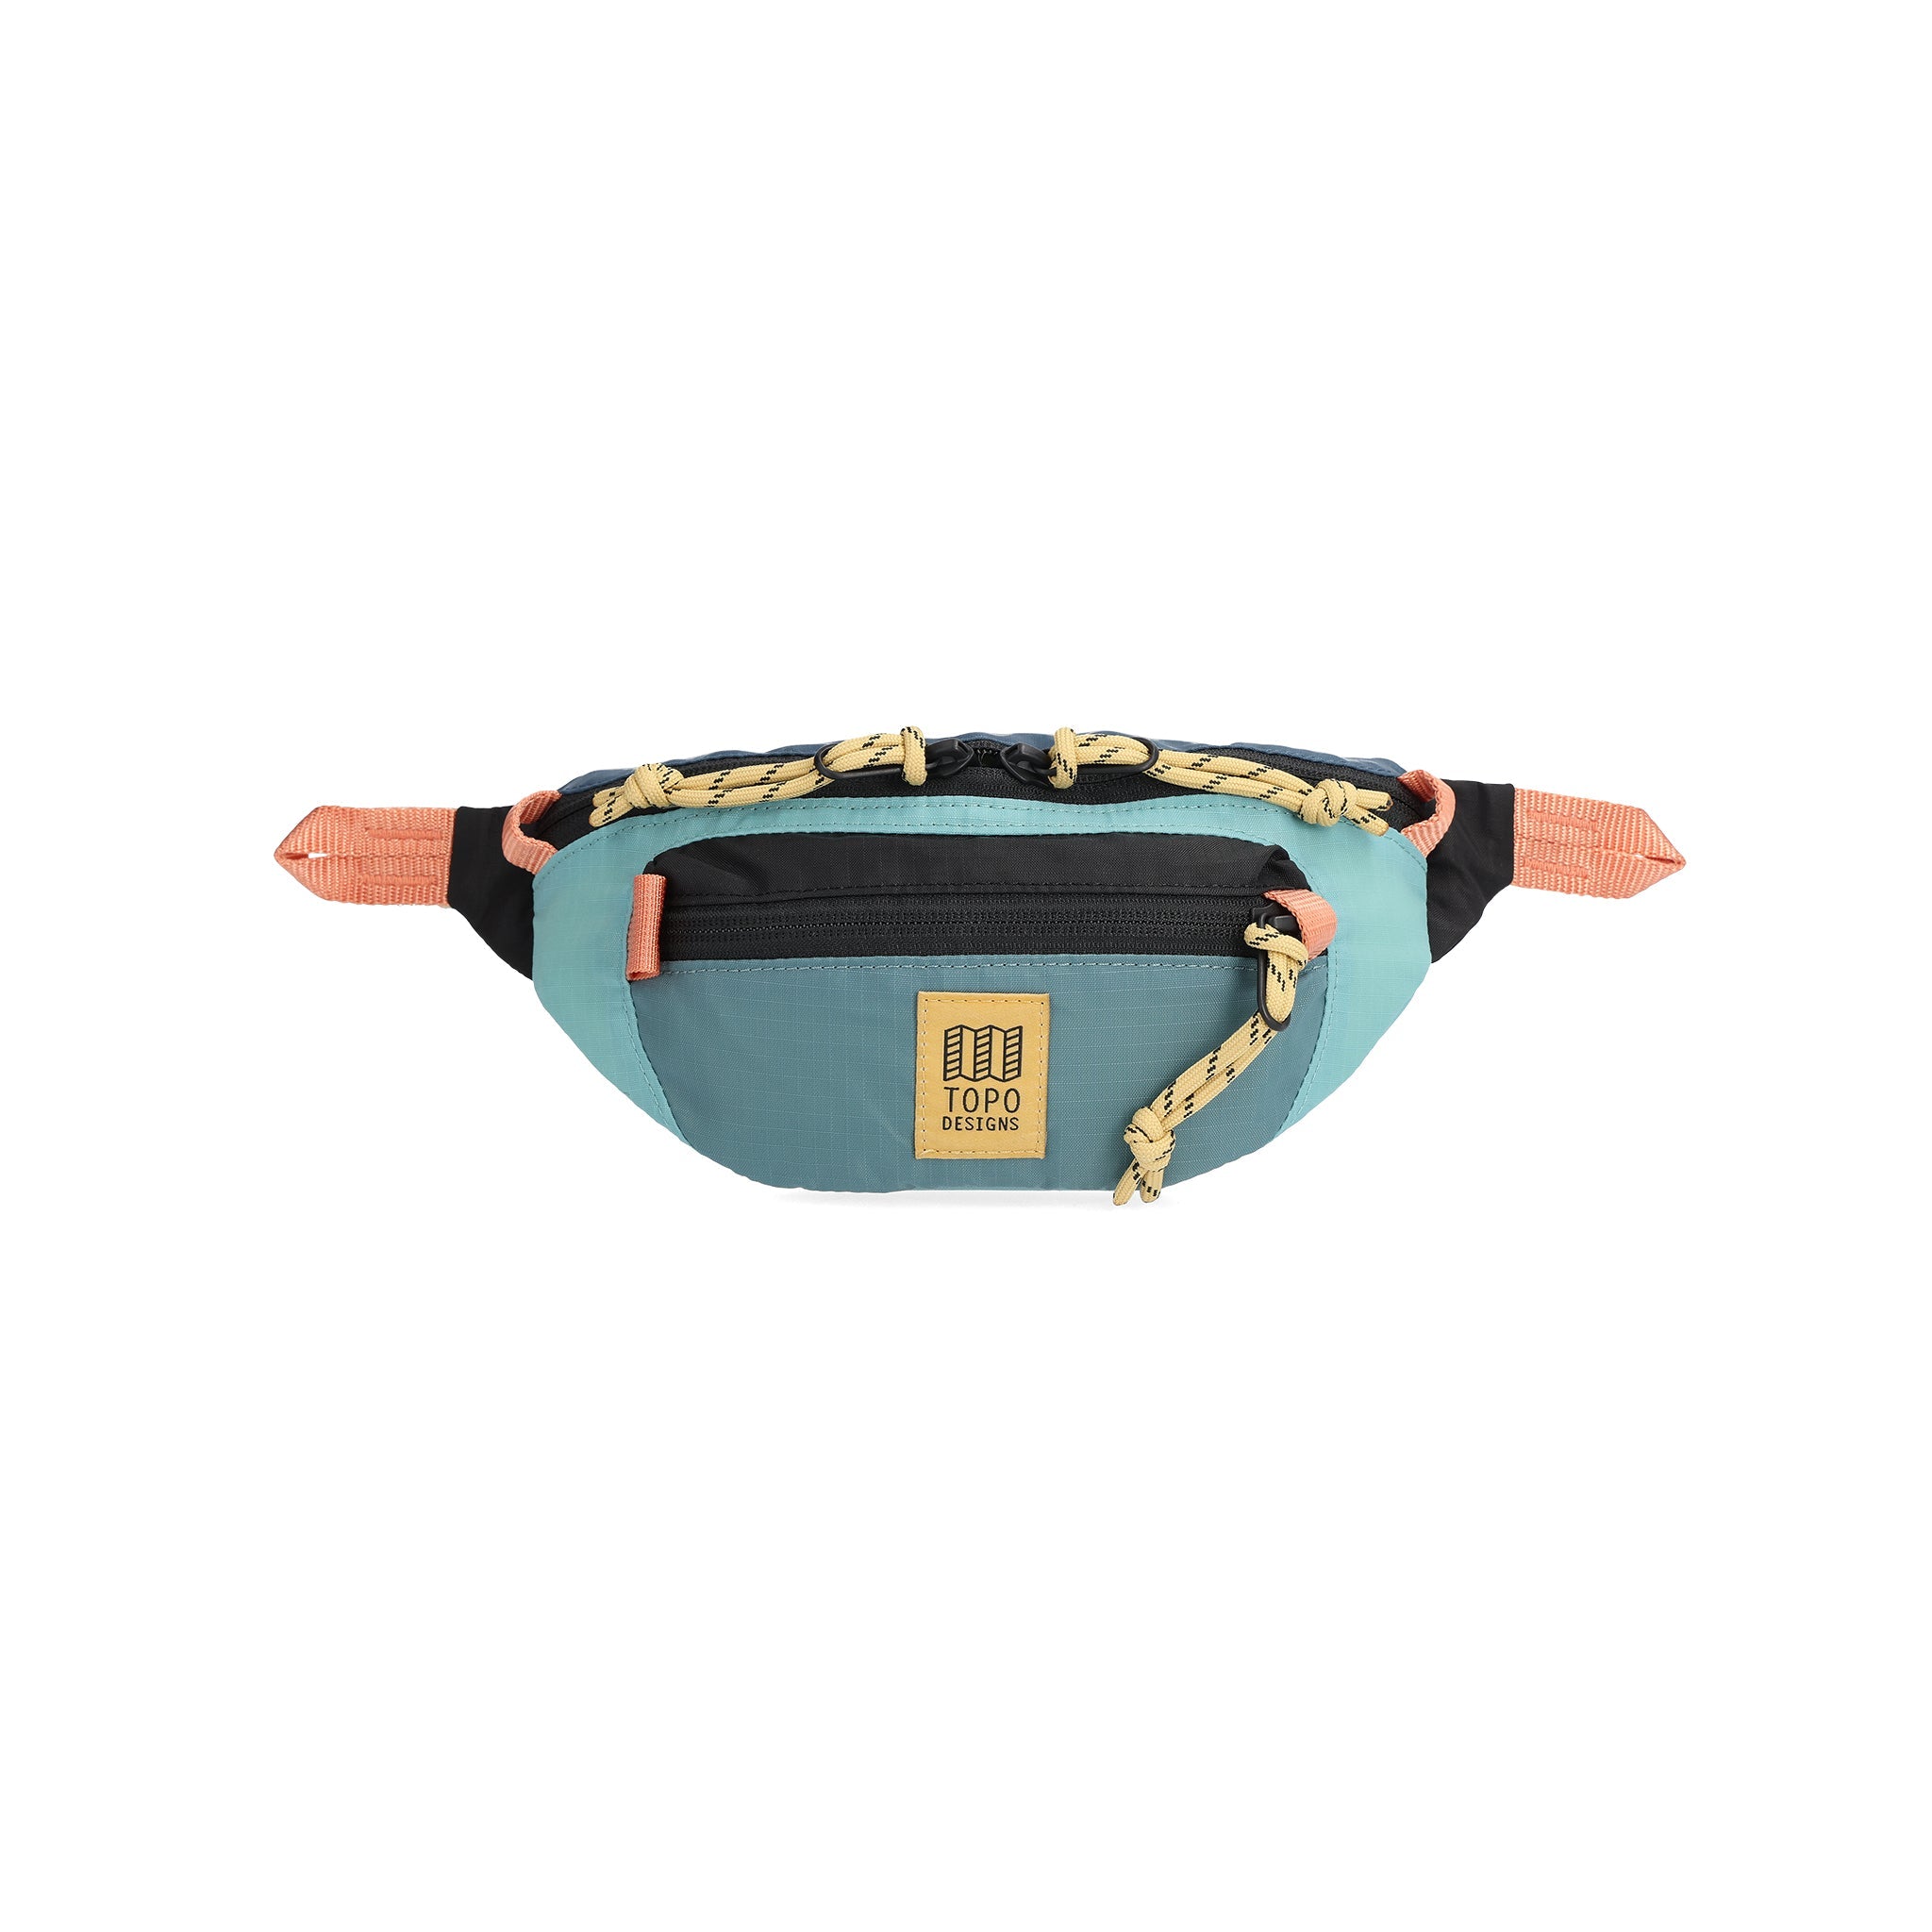 Front View of Topo Designs Mountain Waist Pack in "Geode Green / Sea Pine"